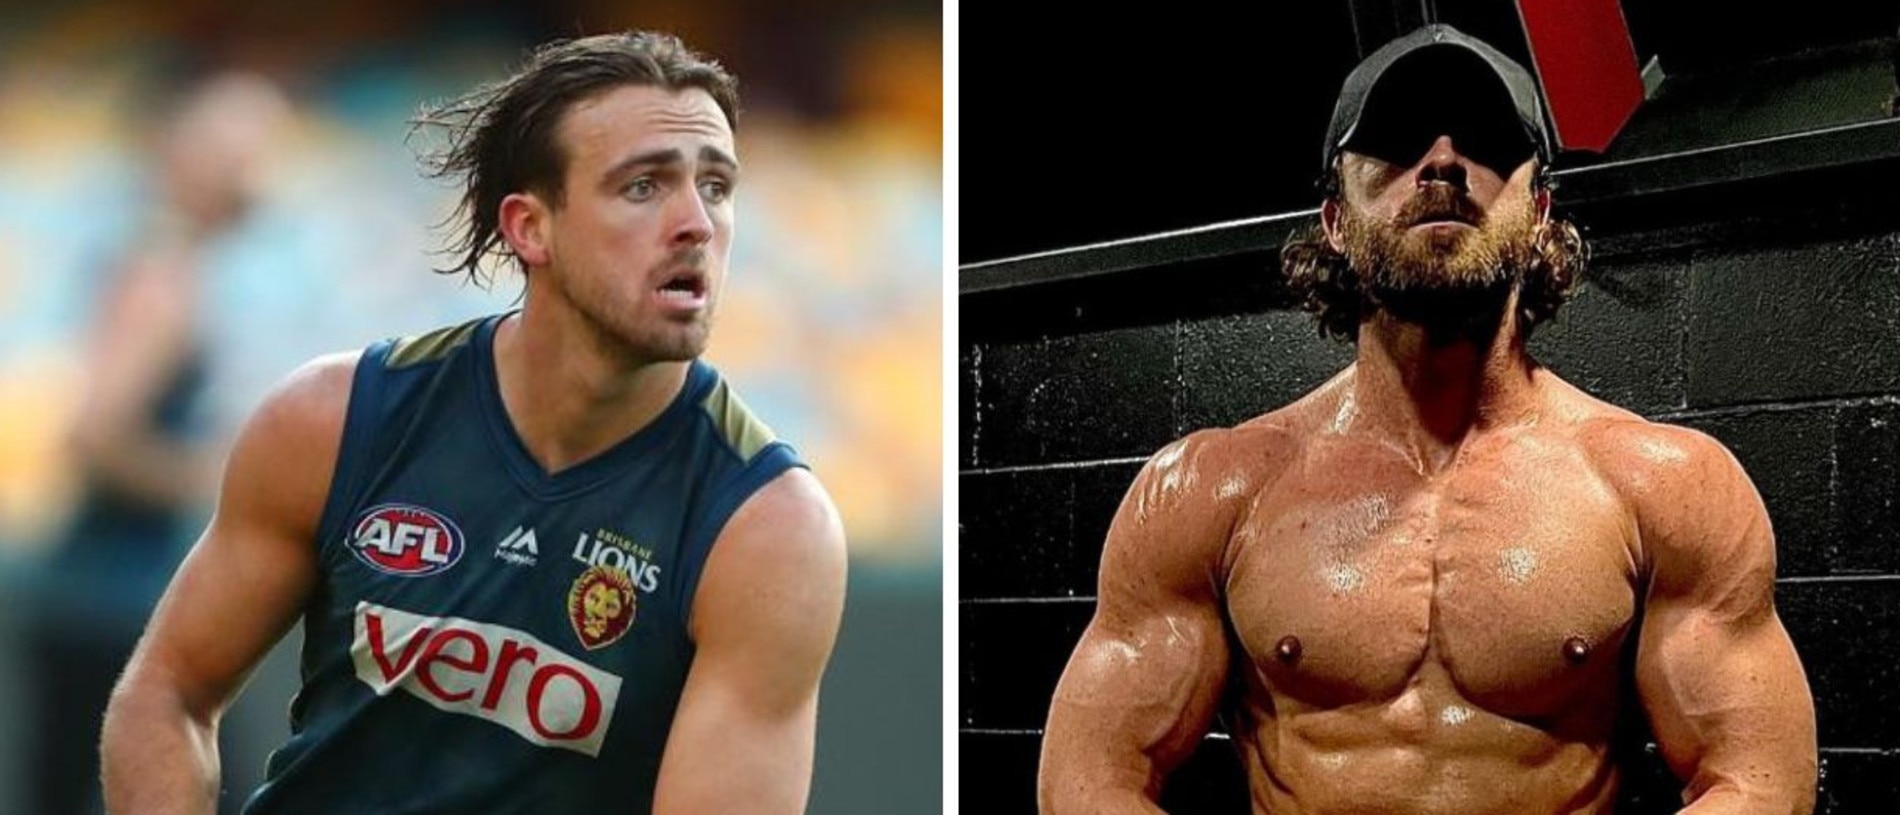 Rhys Mathieson has seriously bulked up.